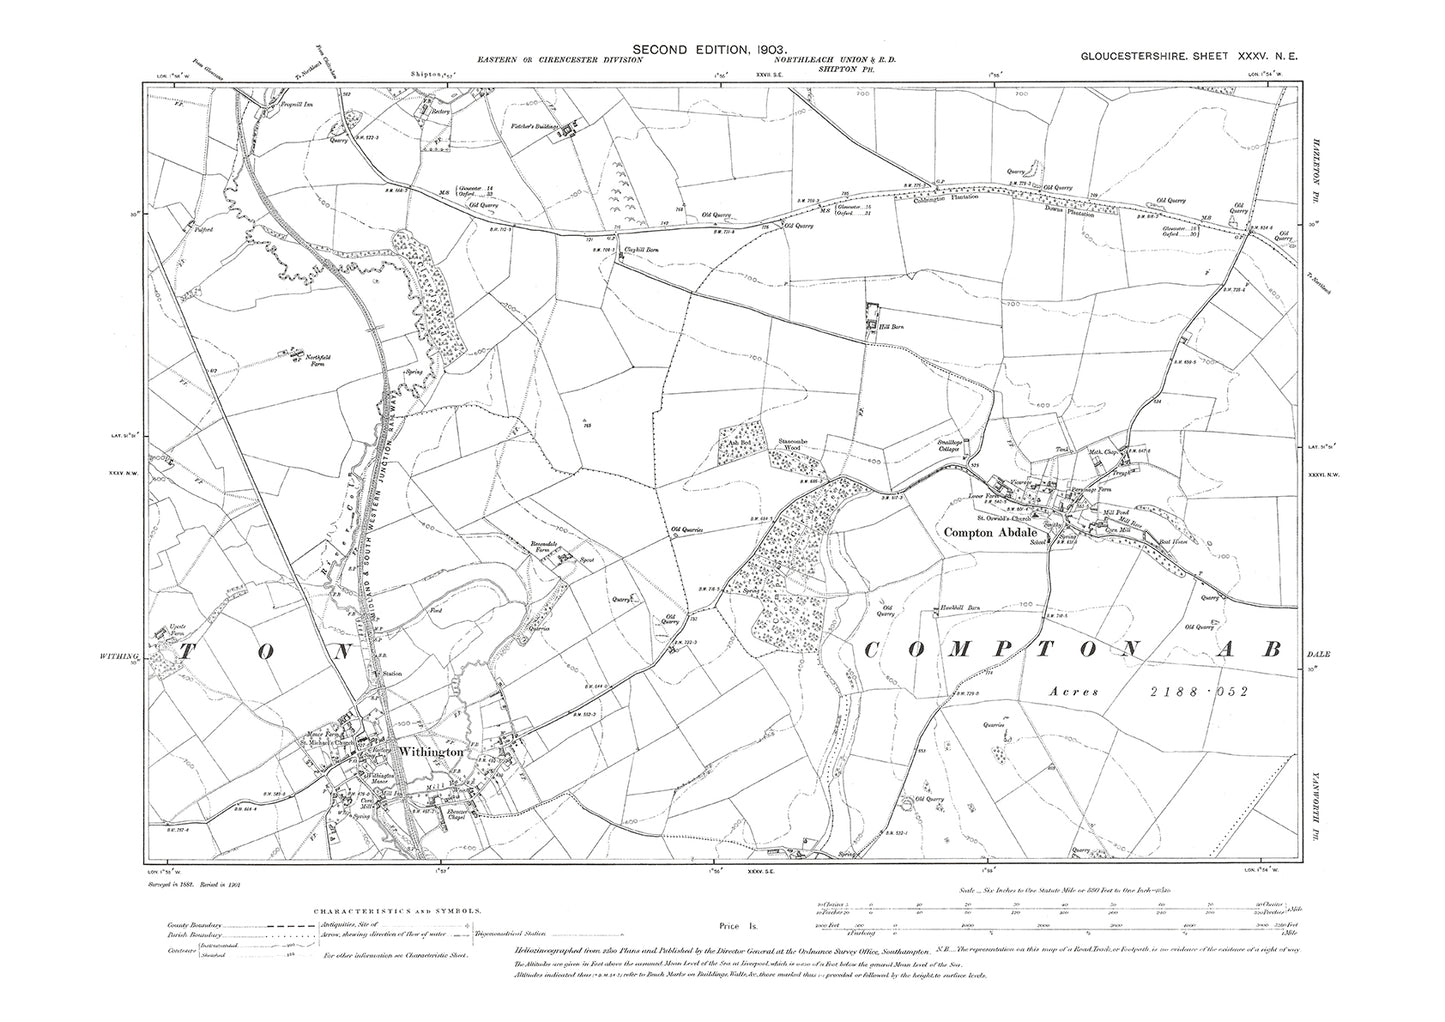 Old OS map dated 1903, showing Withington, Compton Abdale in Gloucestershire - 35NE